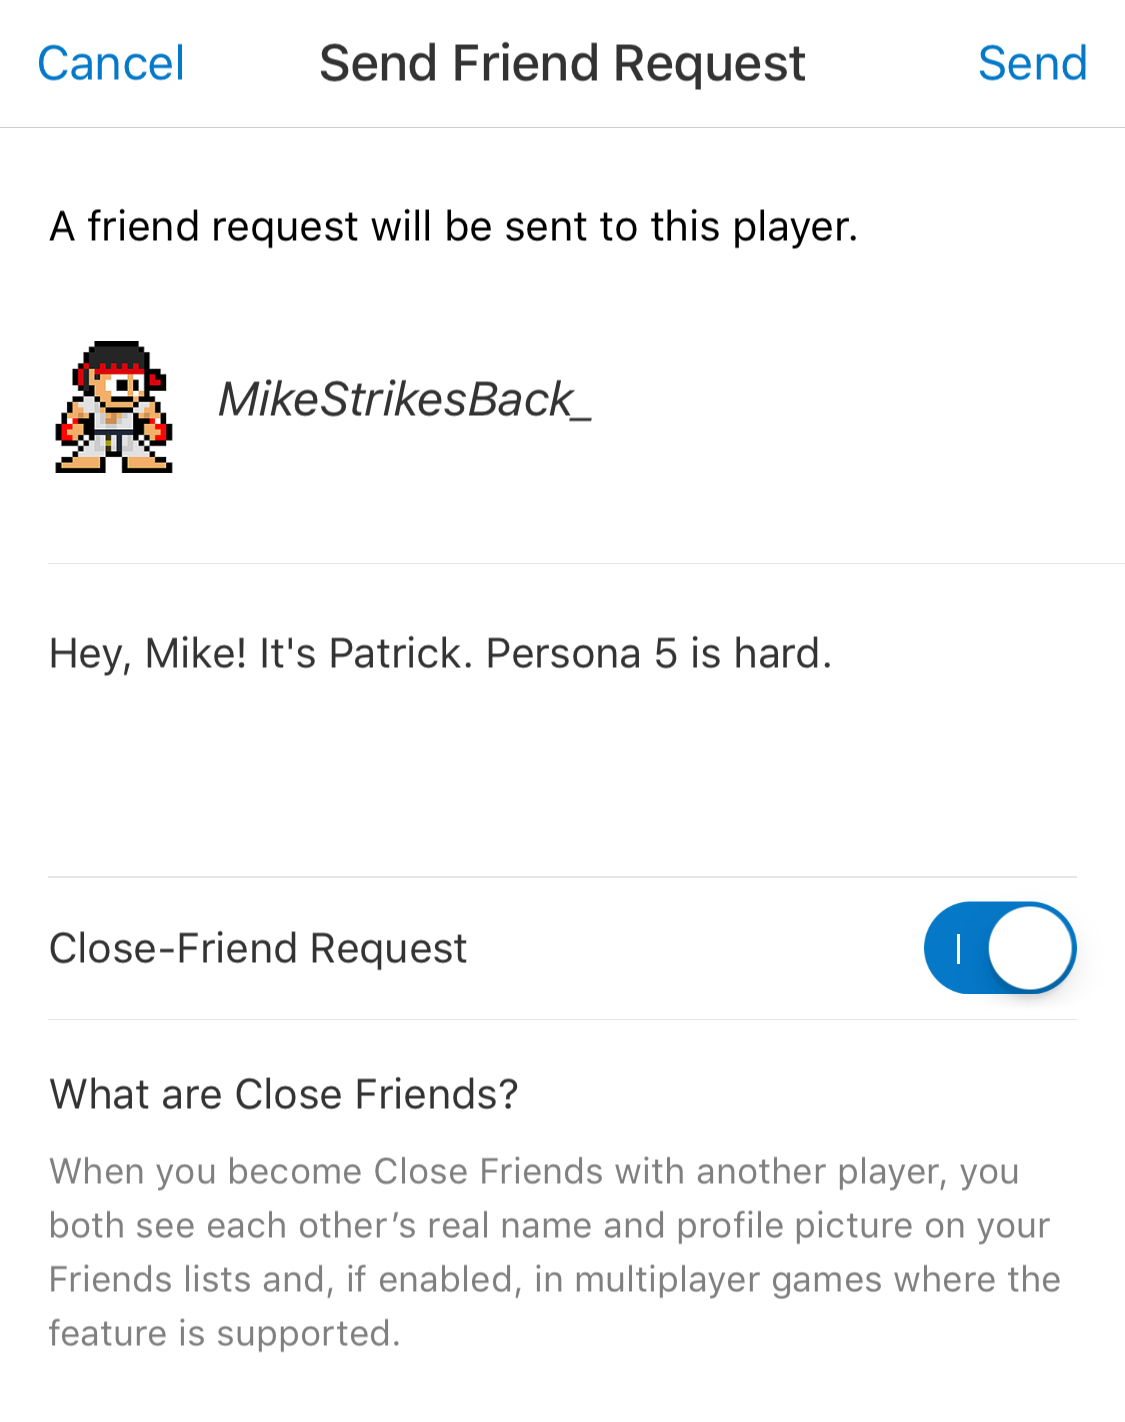 How To Add Friends On Sony’s PlayStation 4